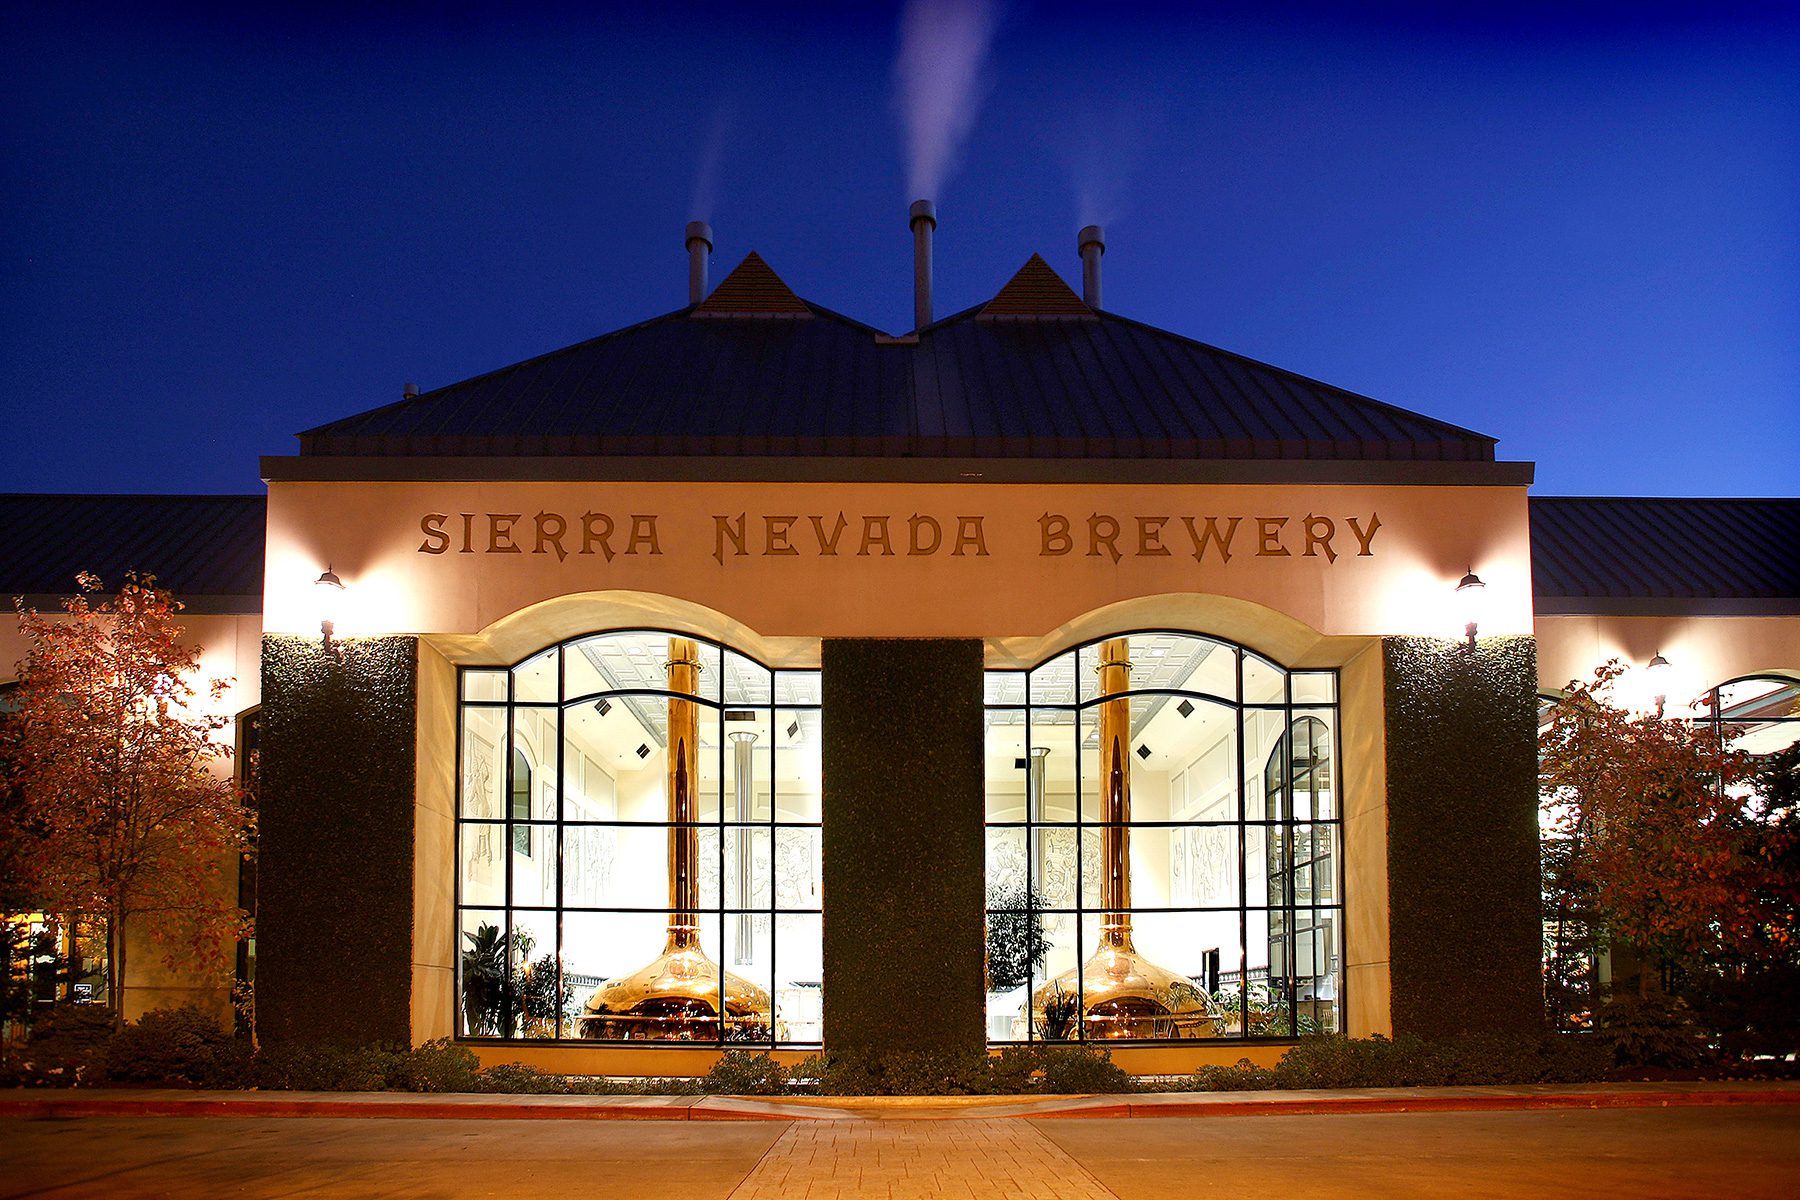 Nighttime view of Sierra Nevada Brewing Co. in Chico, California